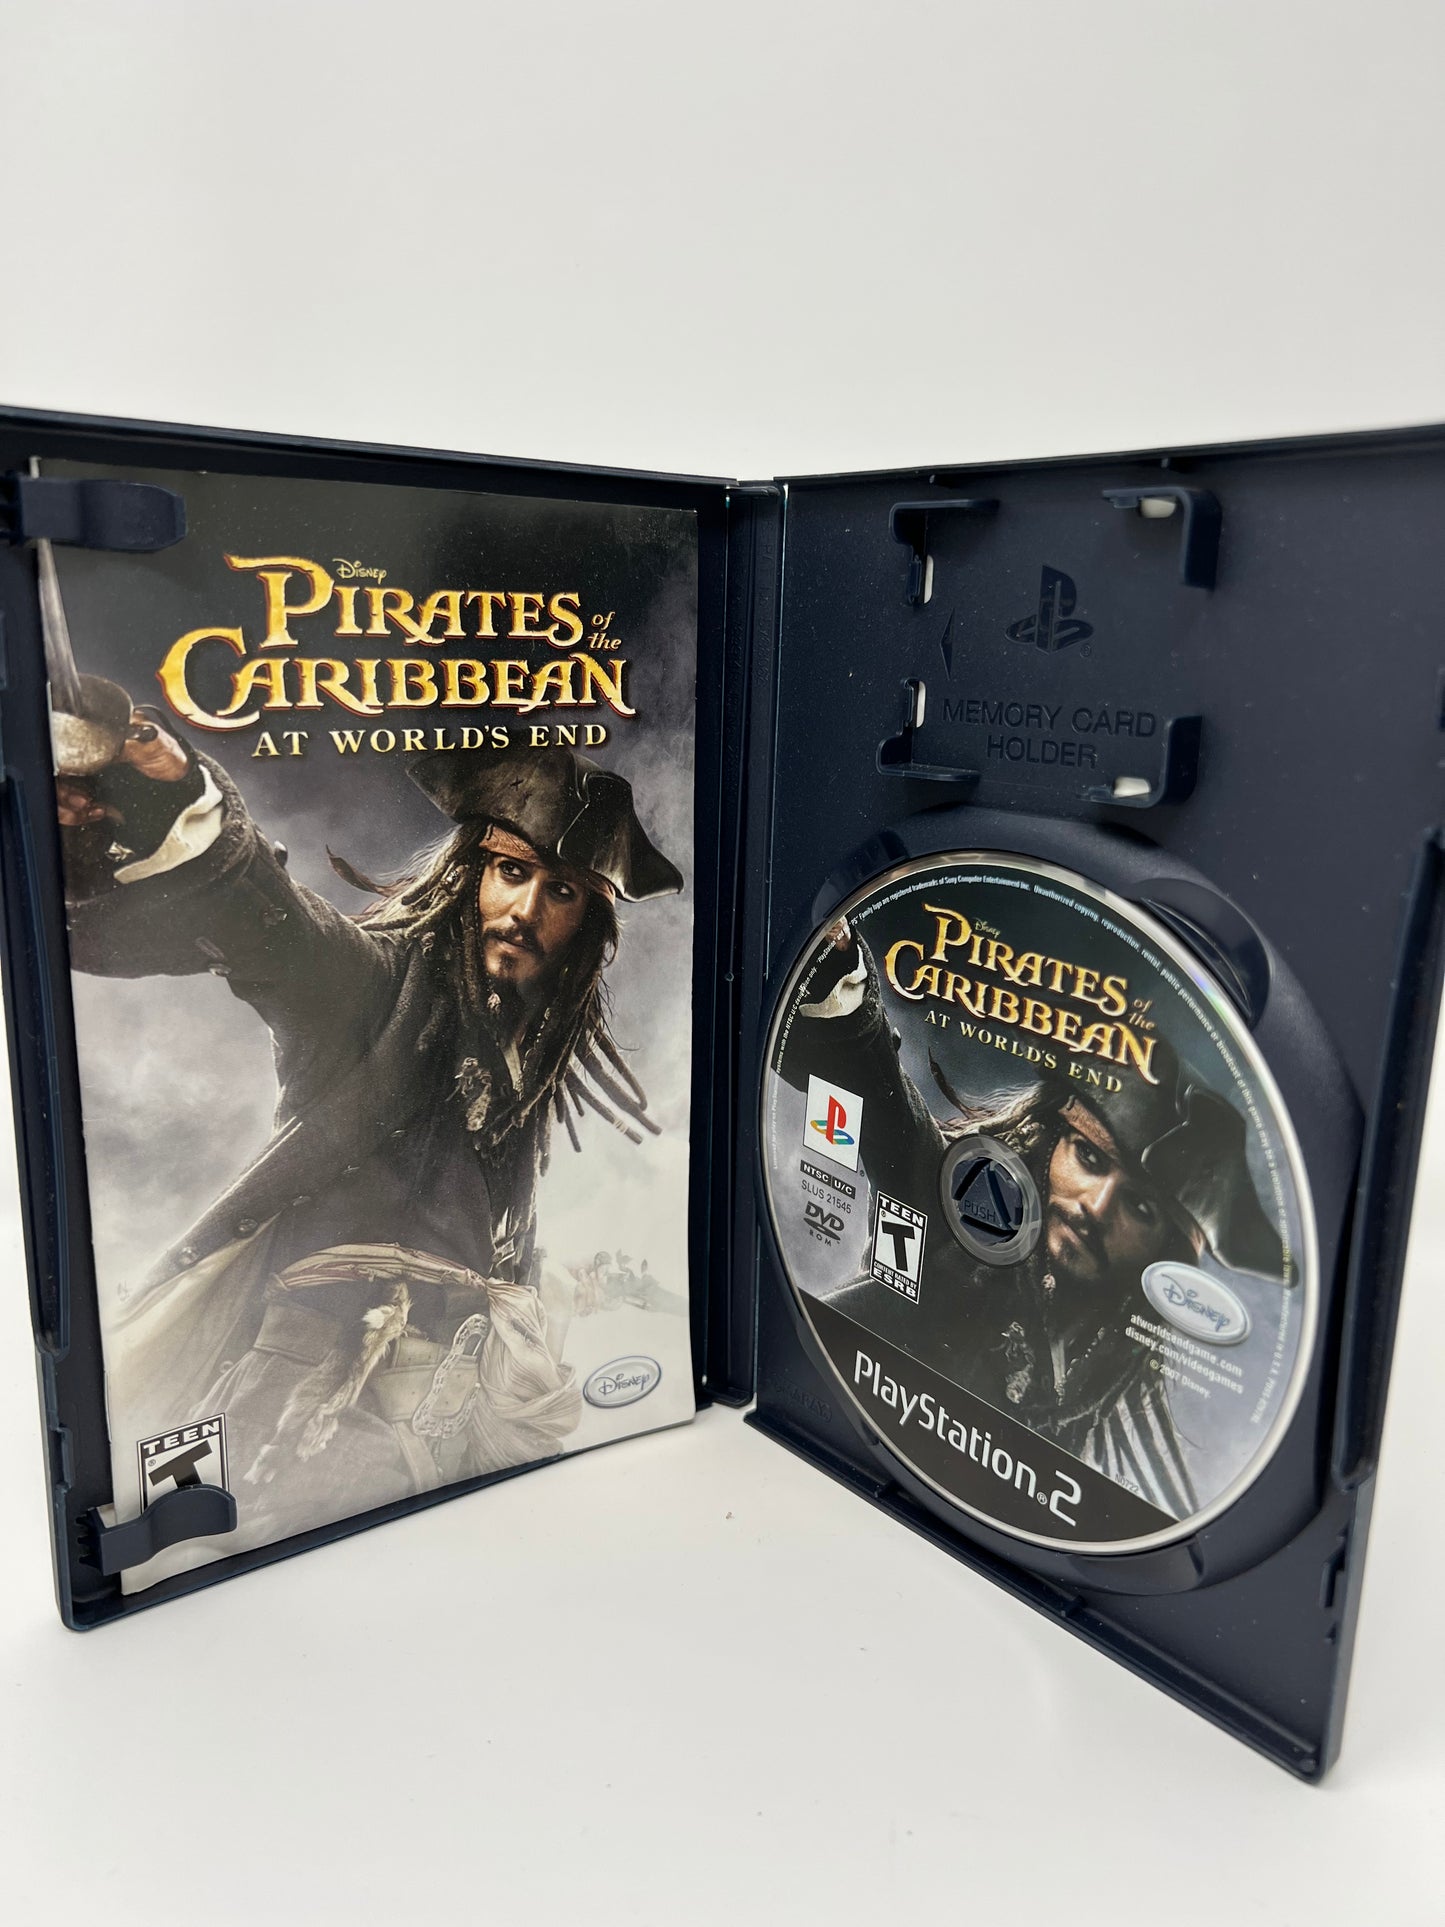 Pirates of the Caribbean At World's End - PS2 Game - Used